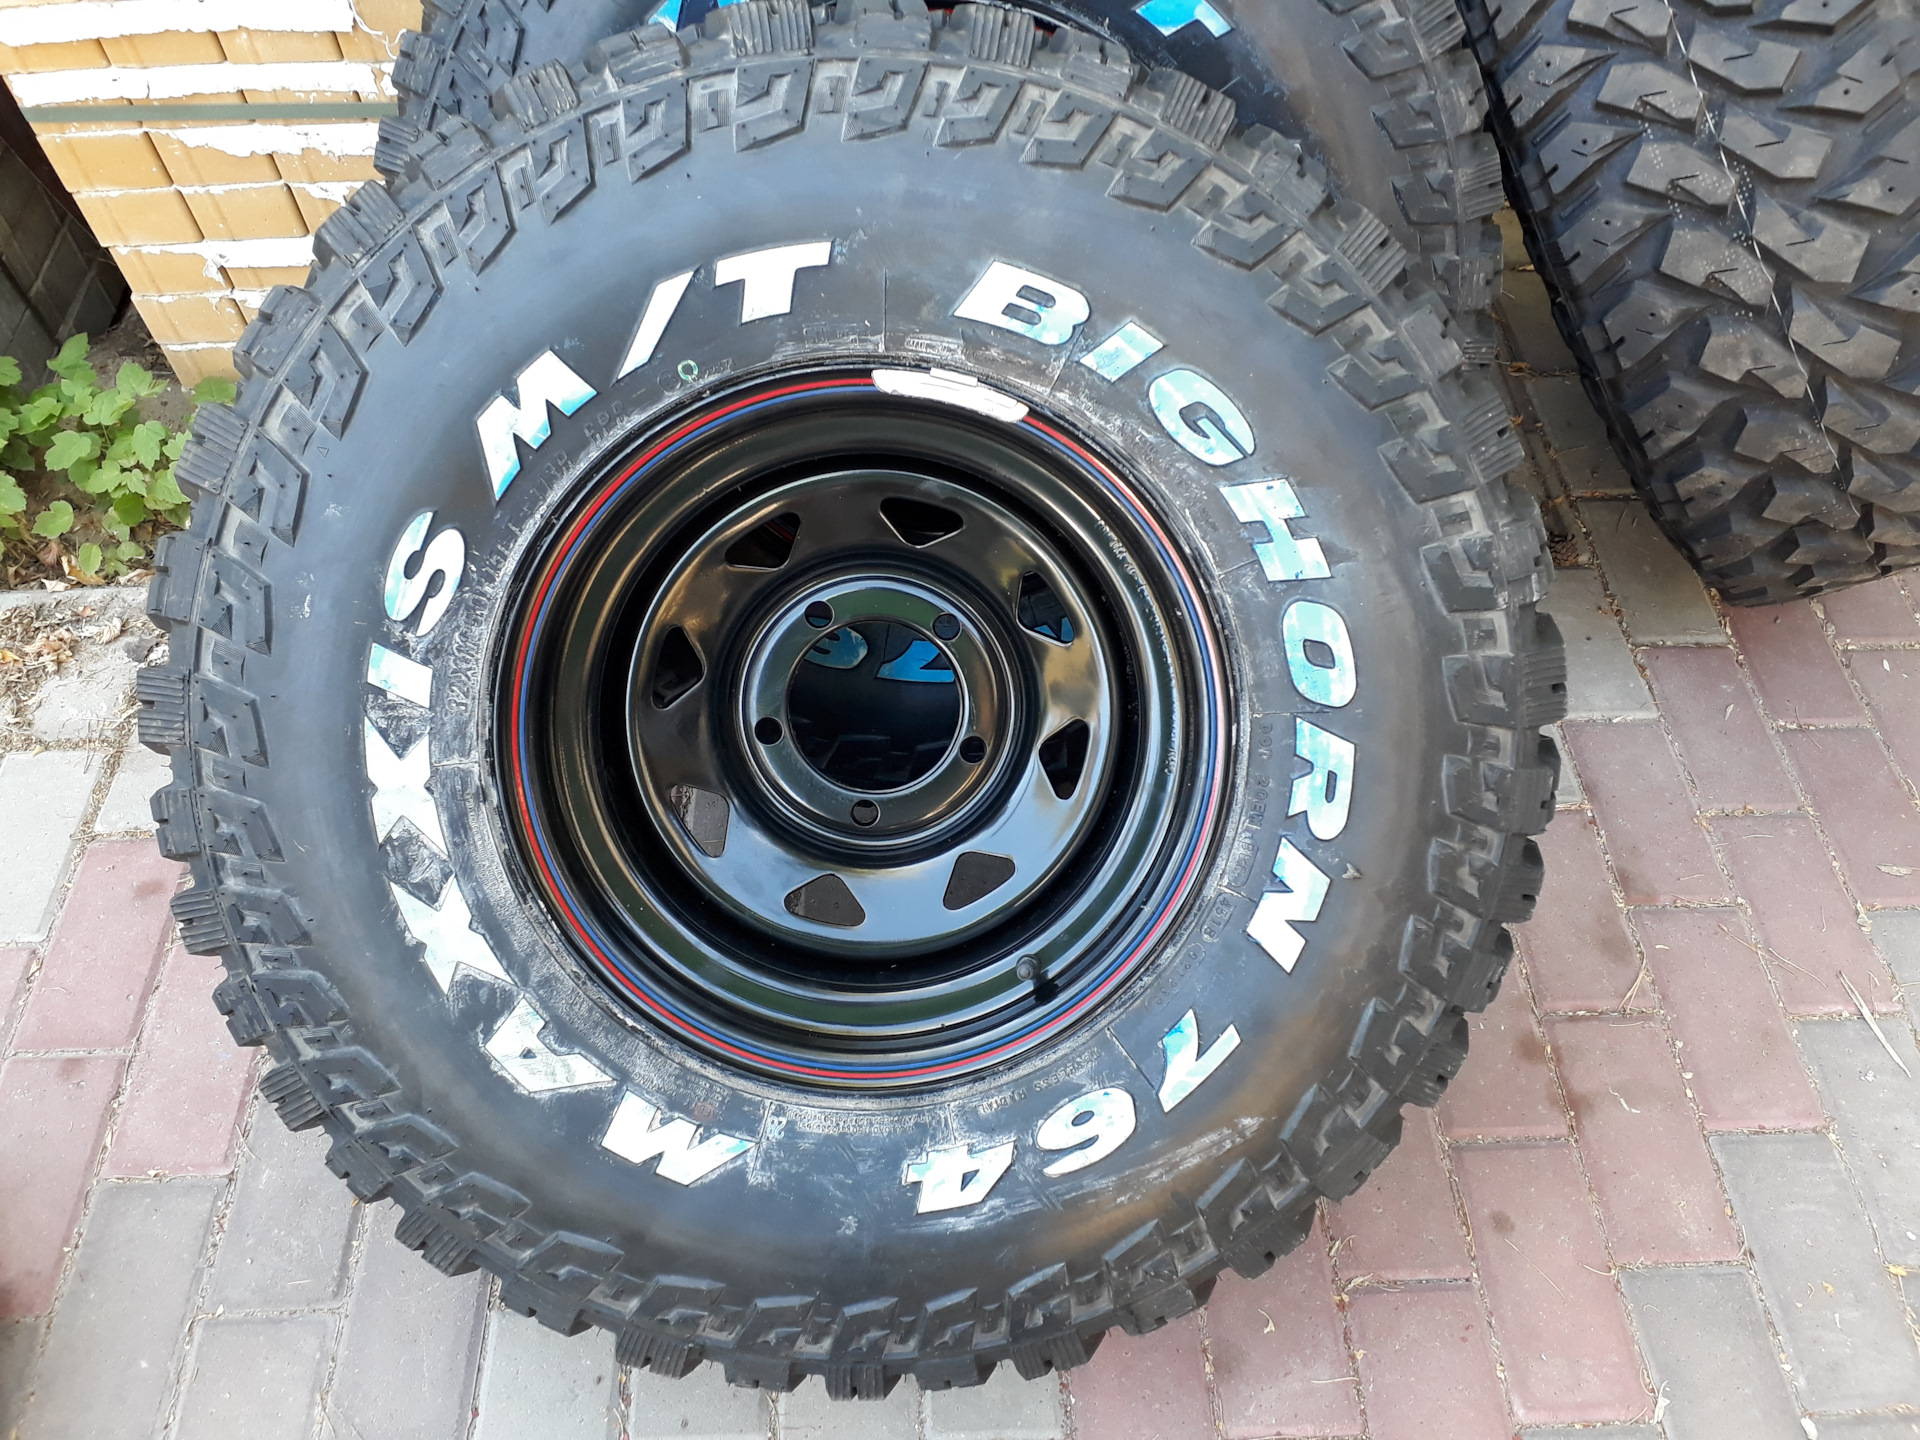 Шина 32 15 15. Maxxis MT-764. МТ 764 Bighorn Maxxis. Шины Maxxis Bighorn MT-764. Maxxis MT-764 Bighorn 235/75 r15.